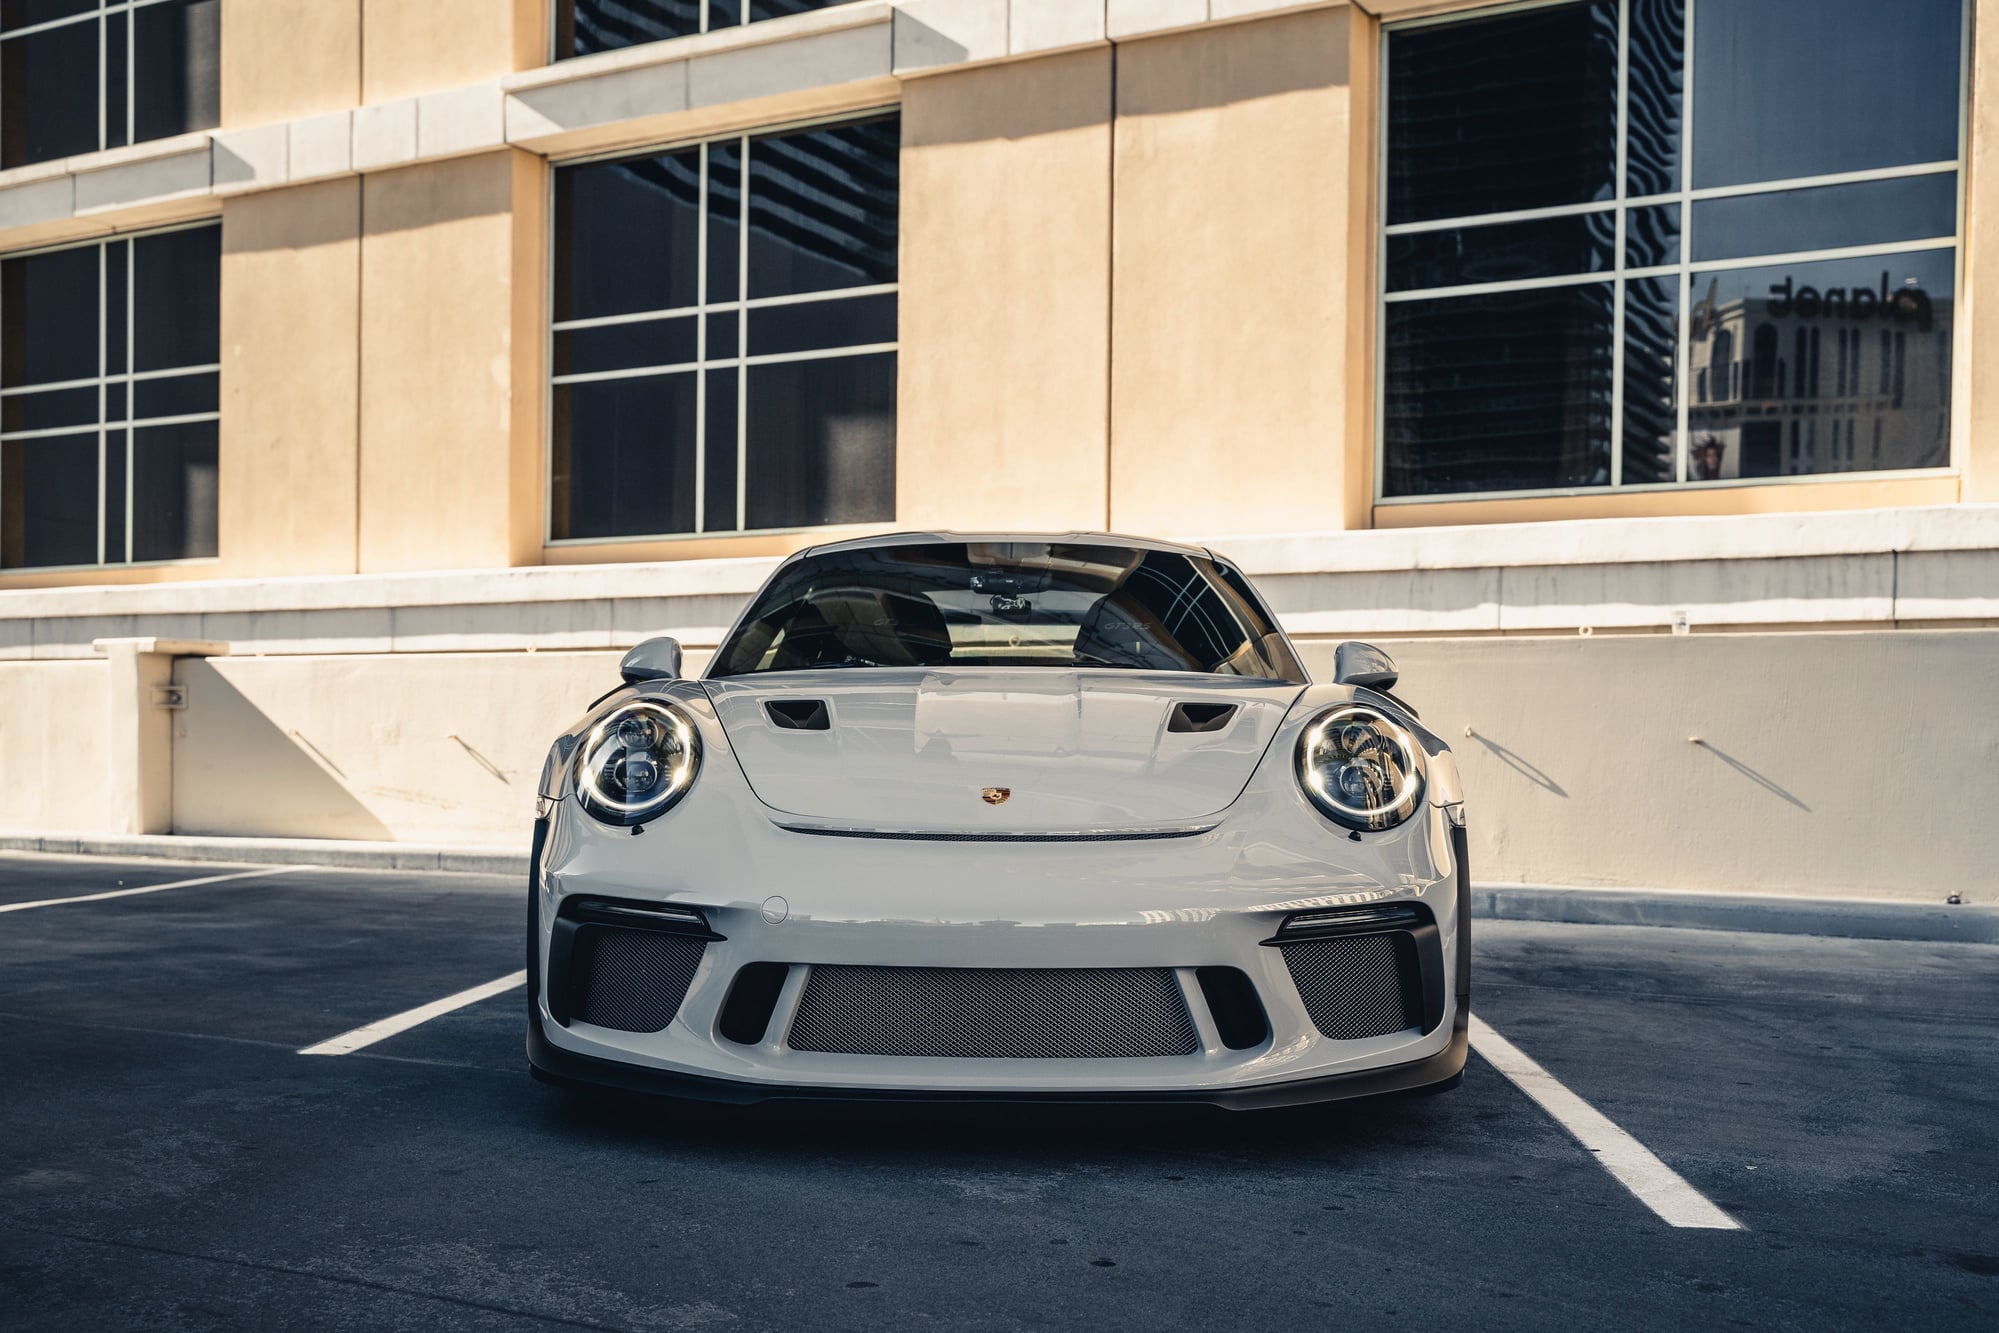 2019 Porsche GT3 - 991.2 GT3 RS For Sale: Chalk, <3400mi, 1 Owner, PCCB, FAL, Leather Int, Full PPF - Used - VIN WP0AF2A90KS165095 - 3,350 Miles - 6 cyl - 2WD - Automatic - Coupe - Gray - Las Vegas, NV 89144, United States